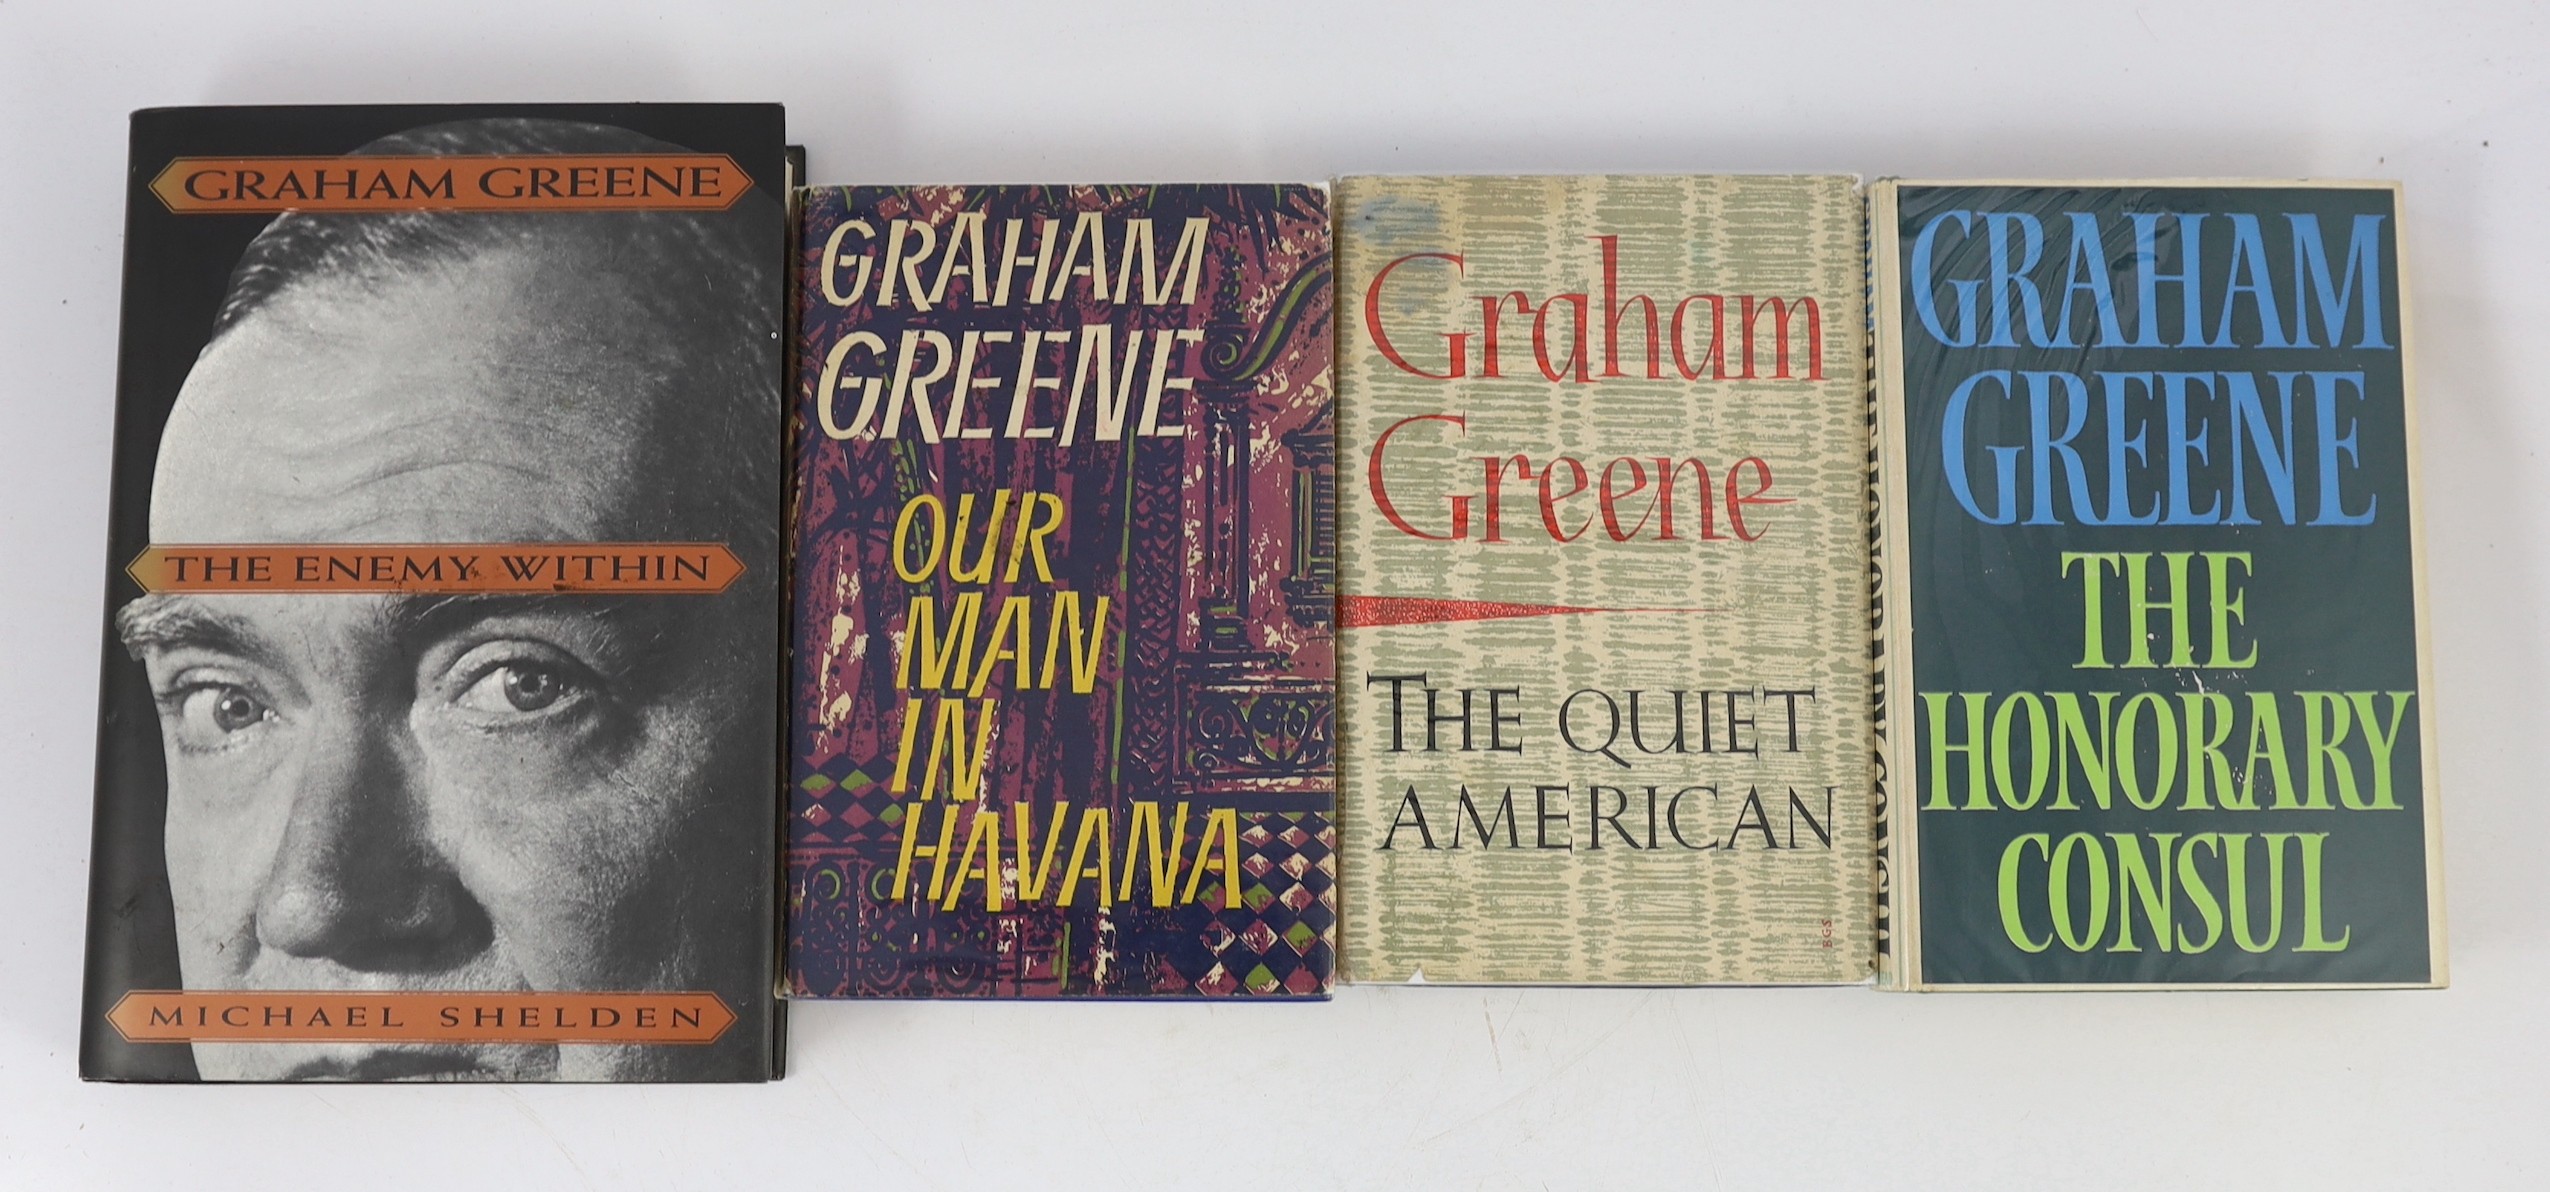 Greene, Graham - 6 first editions, in original unclipped d/j’s - The Quiet American, 1955; Our Man in Havana, 1958; The Comedians, 1966; The Honorary Consul, 1973; The Human Factor, 1978; Monsignor Quixote, 1982 and - Sh